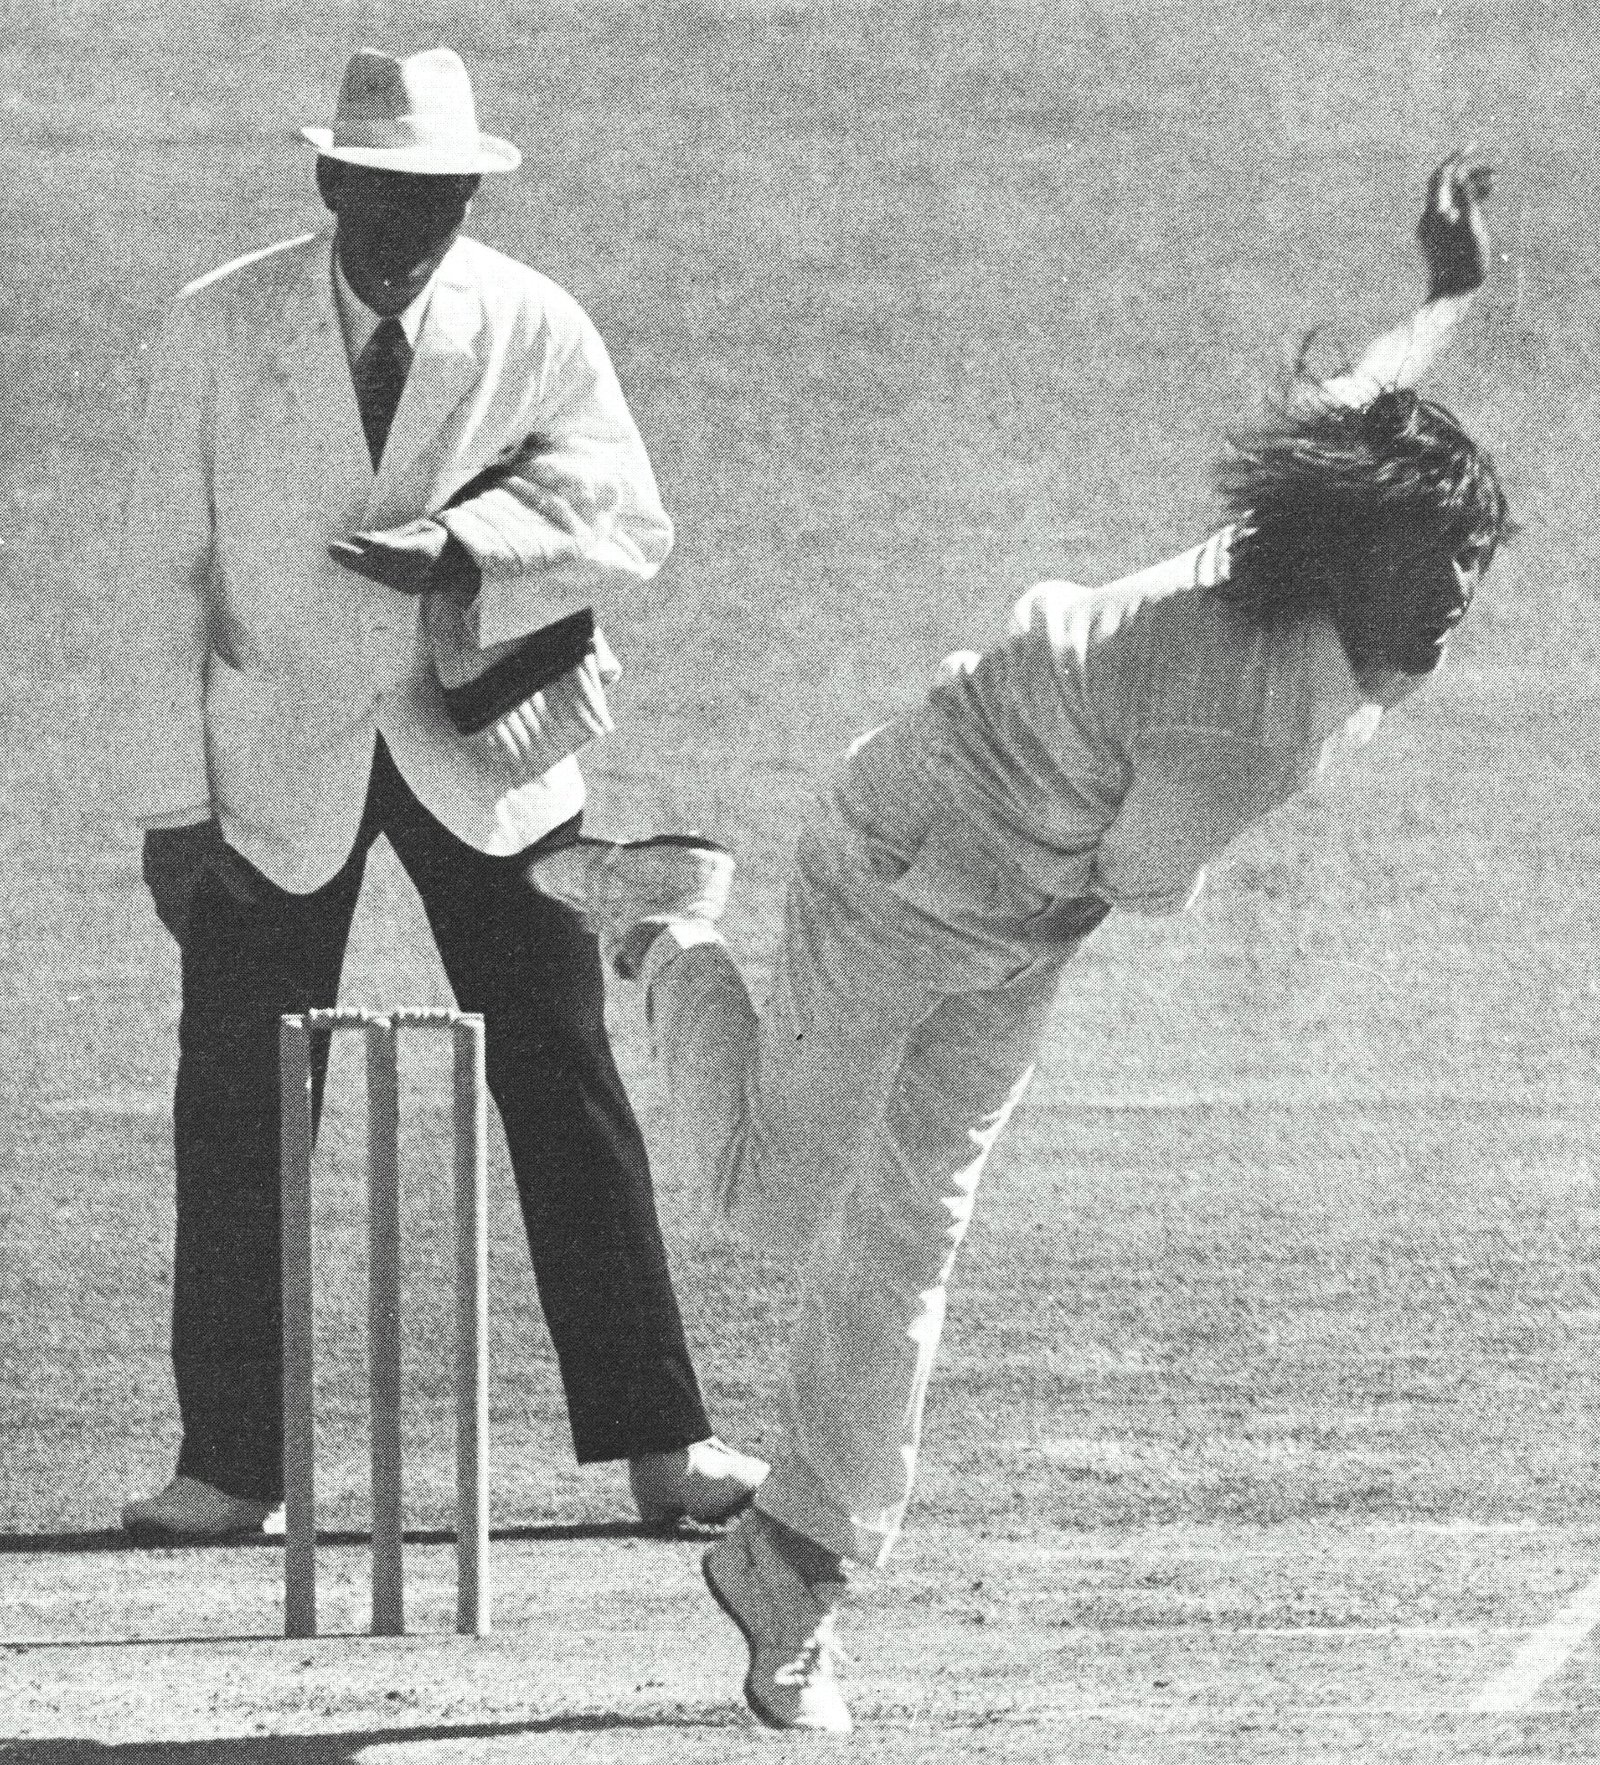 Jeff Thomson, the human hurricane from Australia. Confronted by a bowler so swift, batsmen could think of safer games, such as Russian roulette.